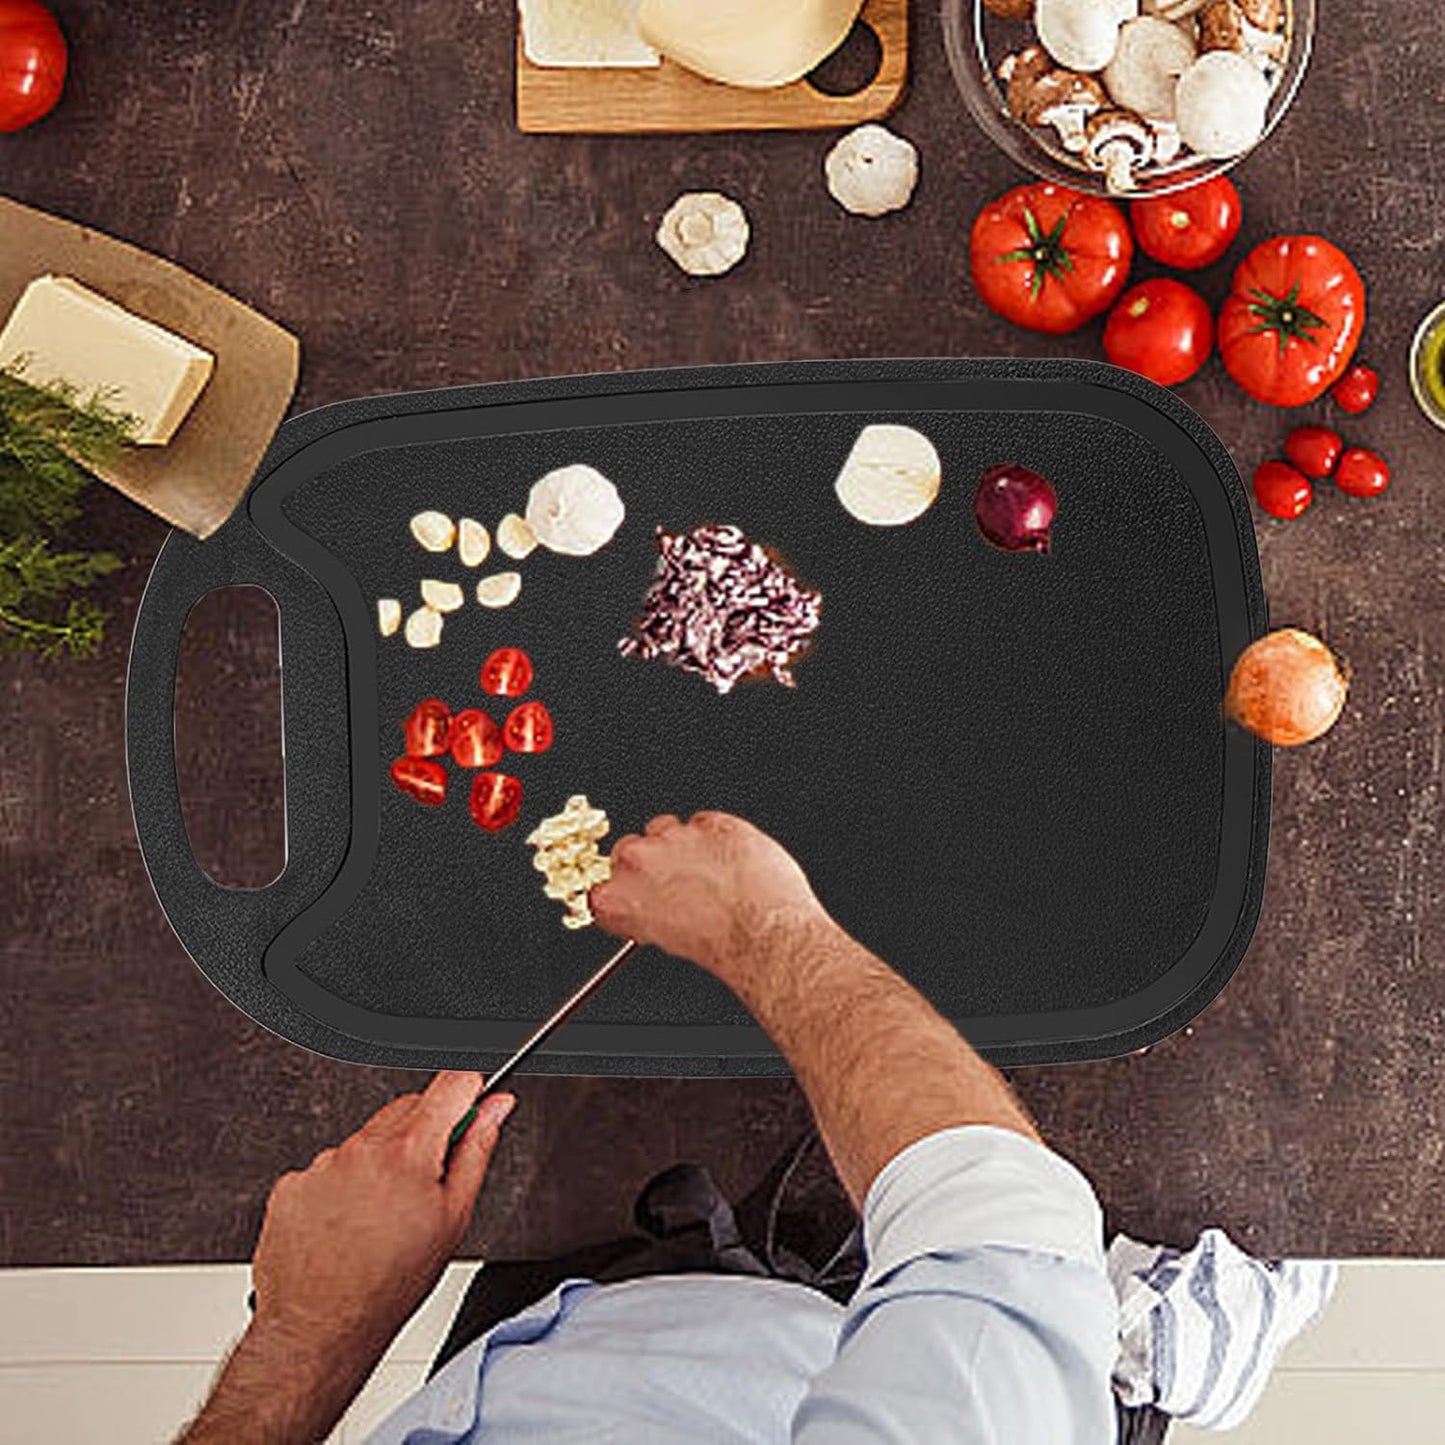 Plastic Cutting Boards for Kitchen Overstock Outlet Dishwasher Safe Double-Sided Design Meat Cutting Board Cutting Board for Meat Easy Grip Handle Non-Slip with Grinding Area Chopping Board  Deal Of The Day Prime Today Only Black  